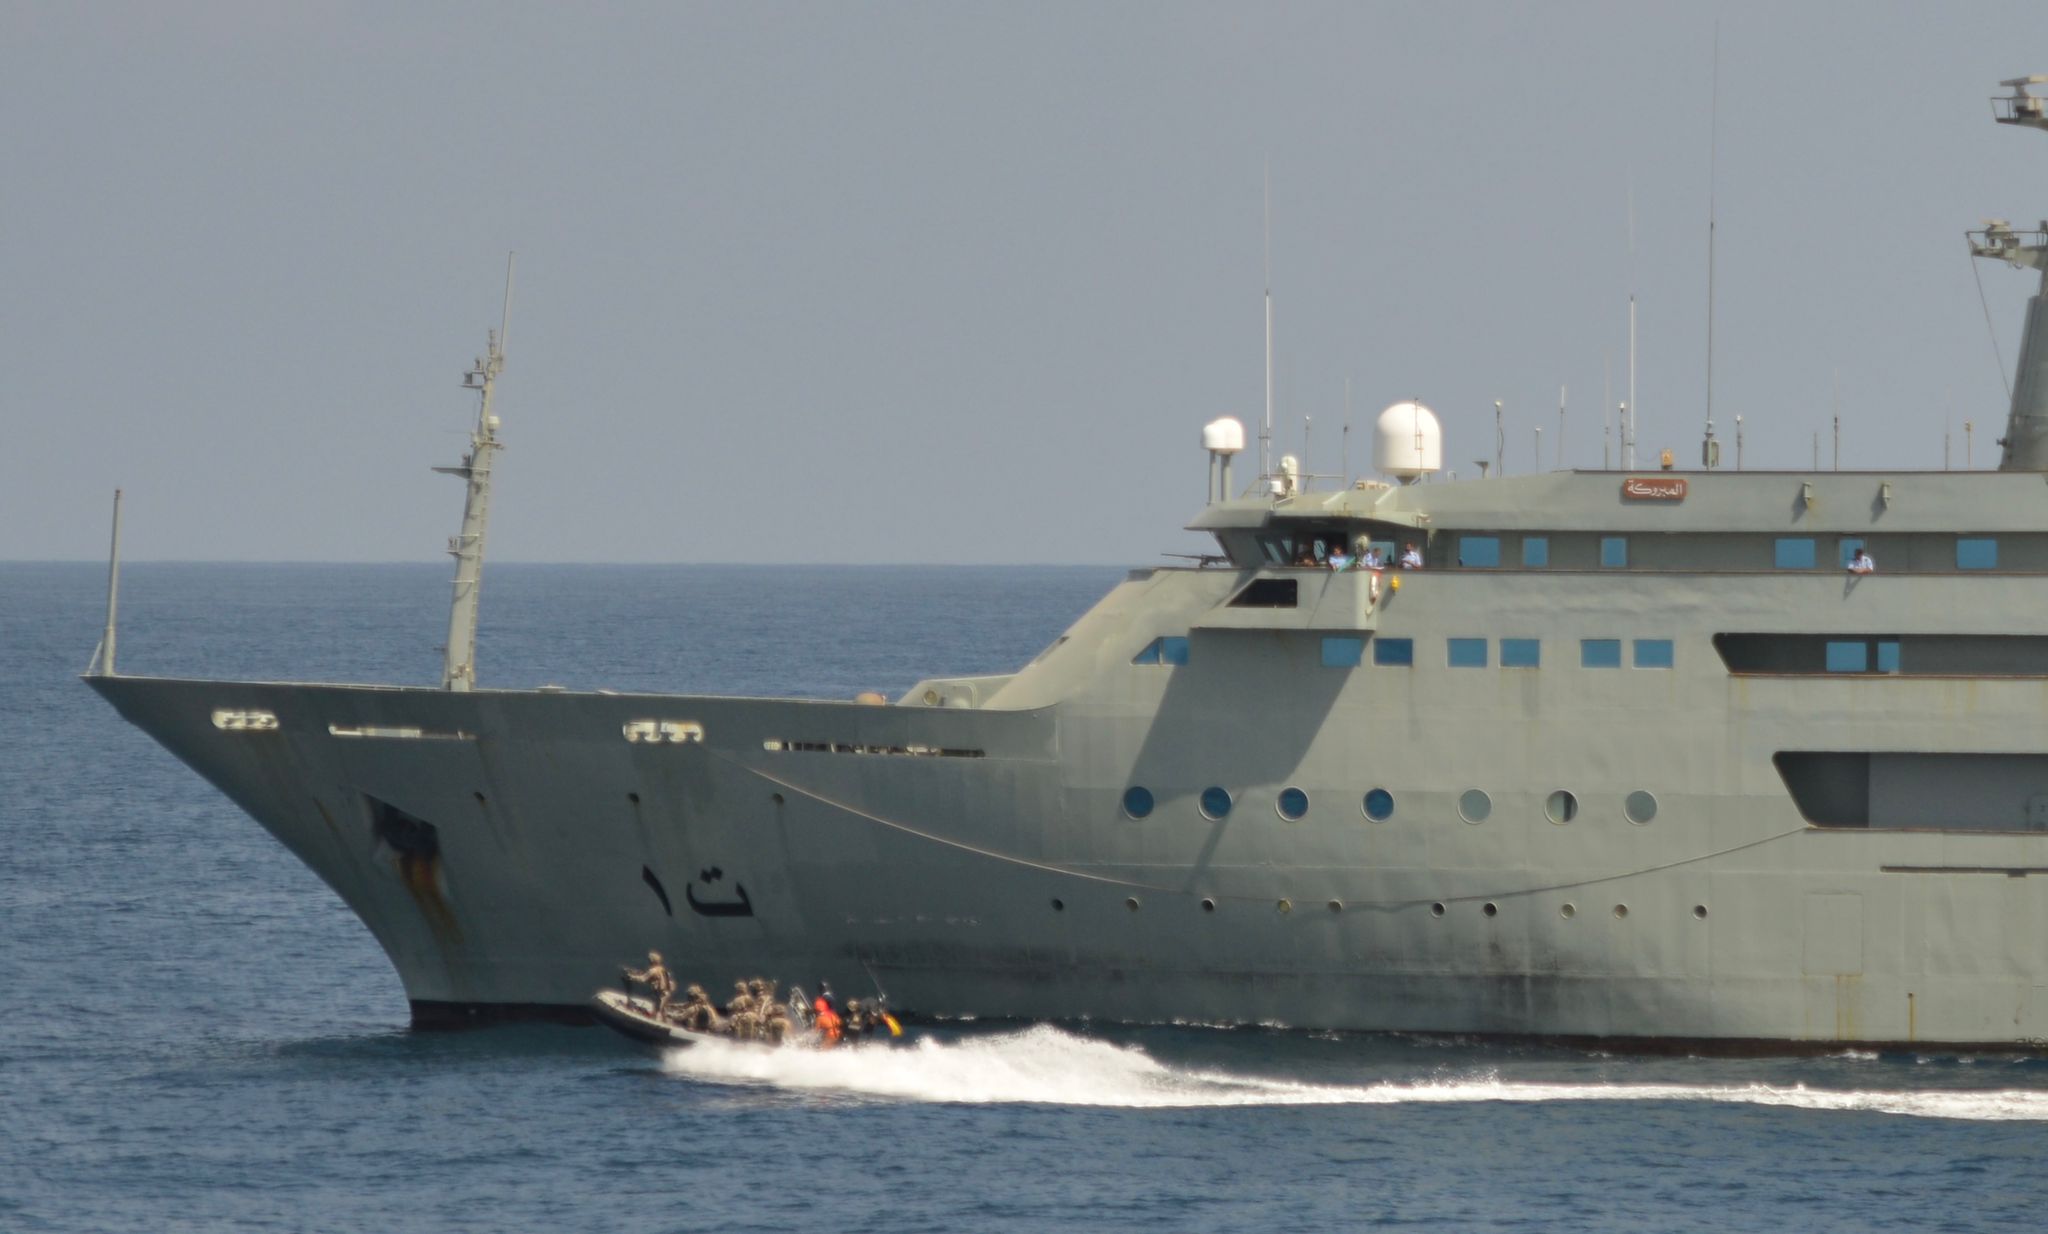 EU NAVFOR Somalia conducts a joint naval exercise with the Sultanate of Oman